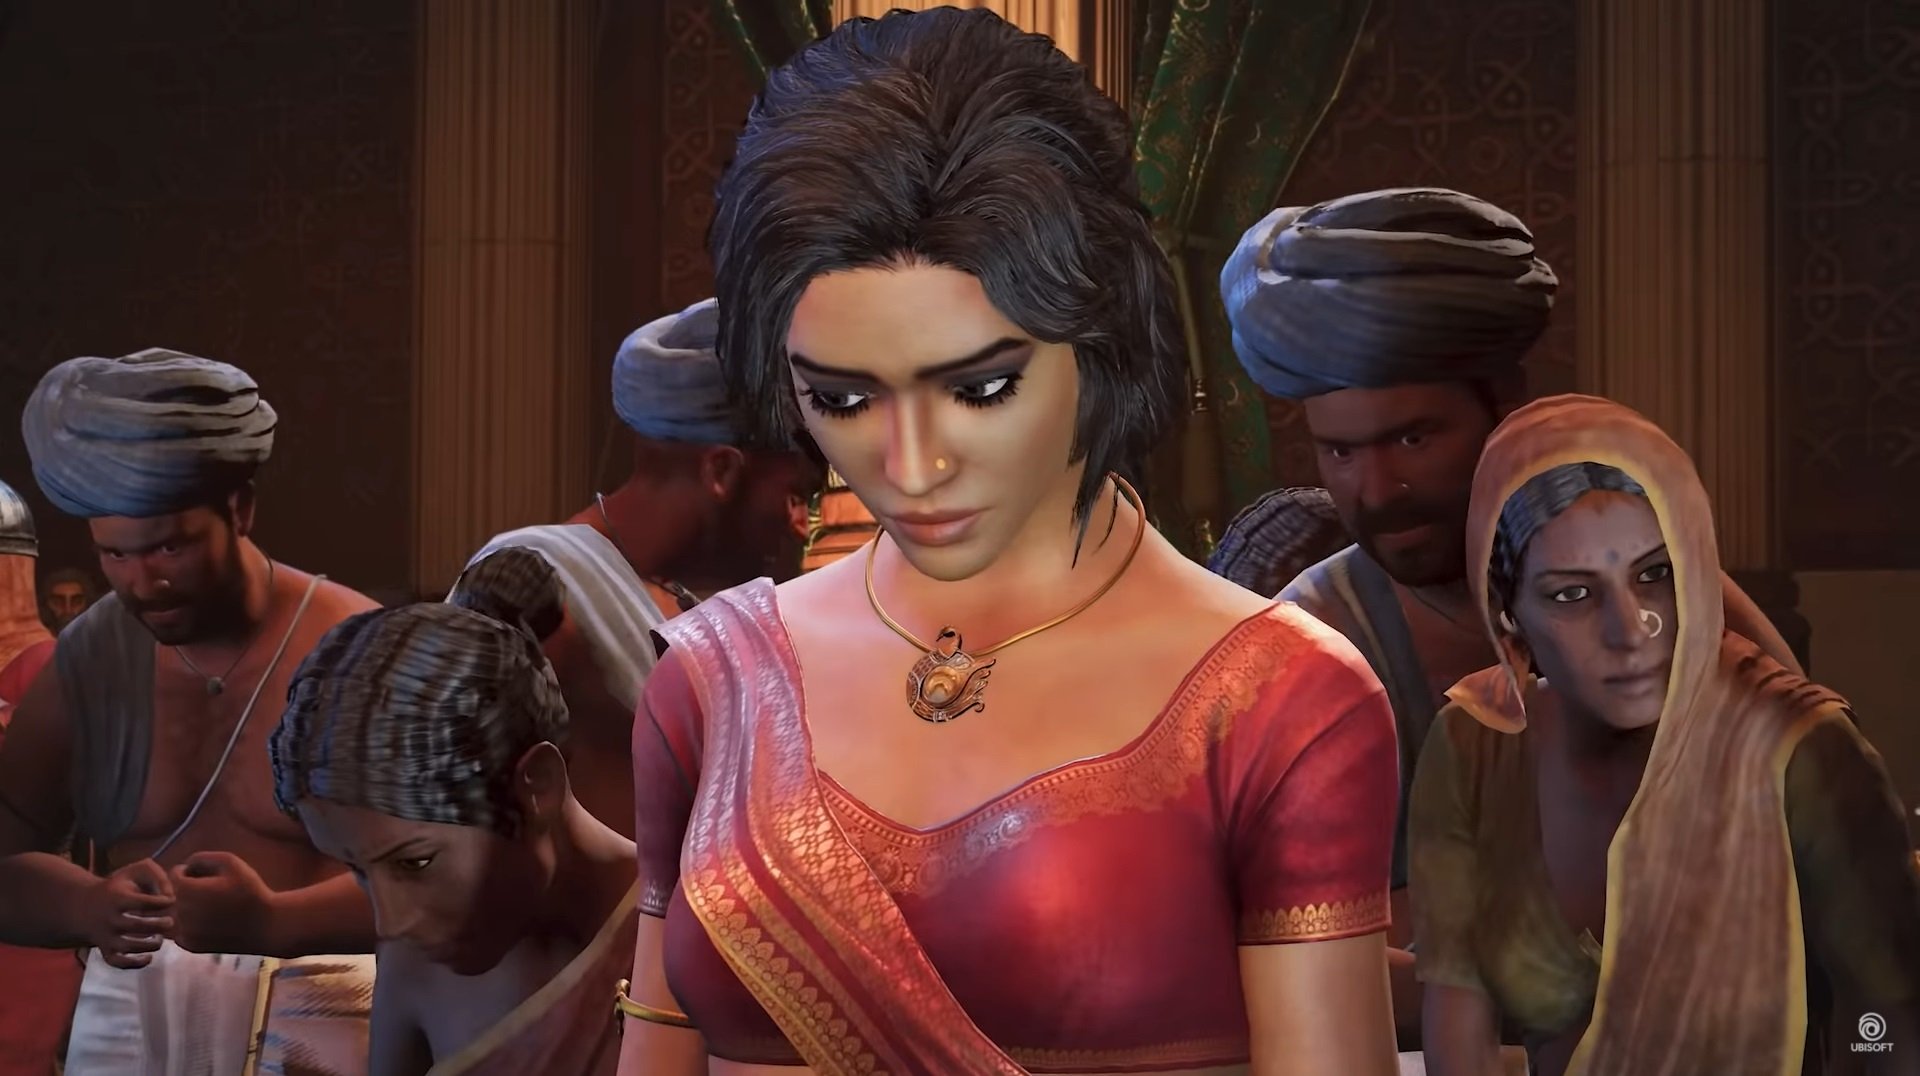 Prince of Persia: The Sands of Time Remake 'has a unique visual treatment to make it stand out' | VGC